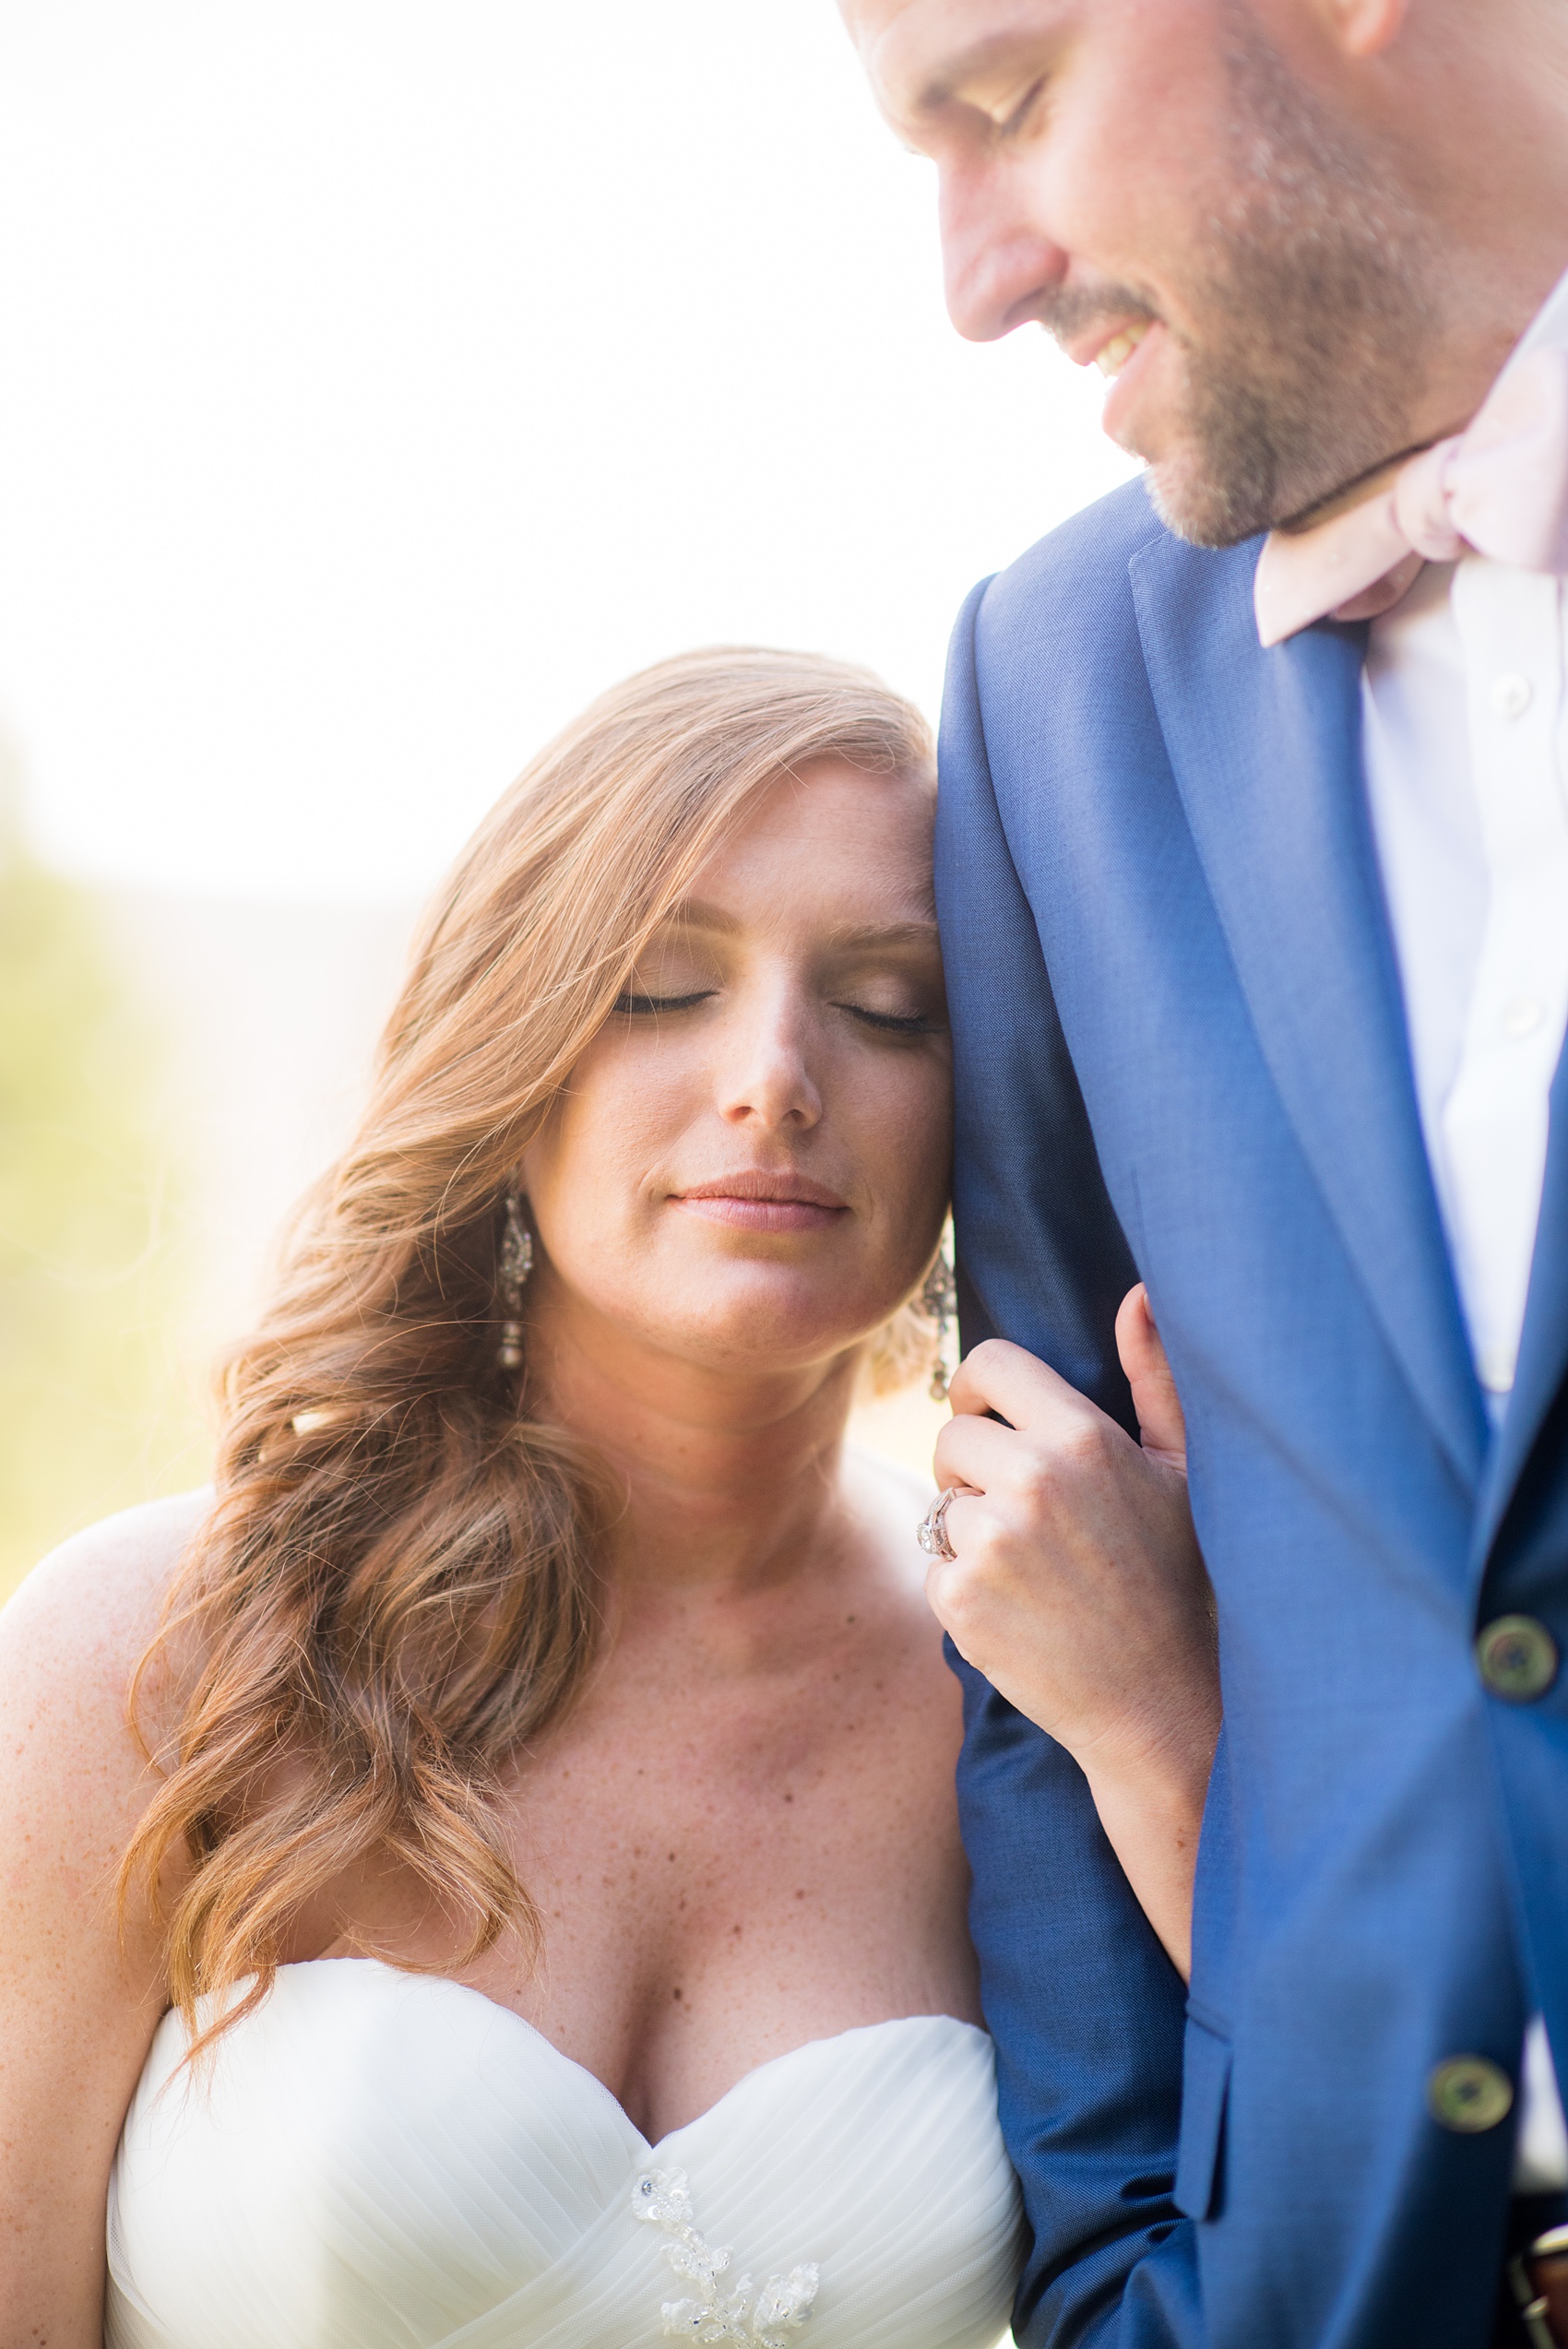 Crystal Springs Resort wedding photos in New Jersey, with photographer Mikkel Paige Photography. The couple’s spring wedding had an outdoor ceremony with photos at this rustic, woodsy venue showing their blue and pink palette decor from getting ready to their reception. This picture shows the bride and groom in her lace gown and his navy blue suit with pink bow tie. Click through to see their complete wedding recap! #NewJerseywedding #MikkelPaige #NJweddingphotographer #NJphotographer #brideandgroom #springwedding